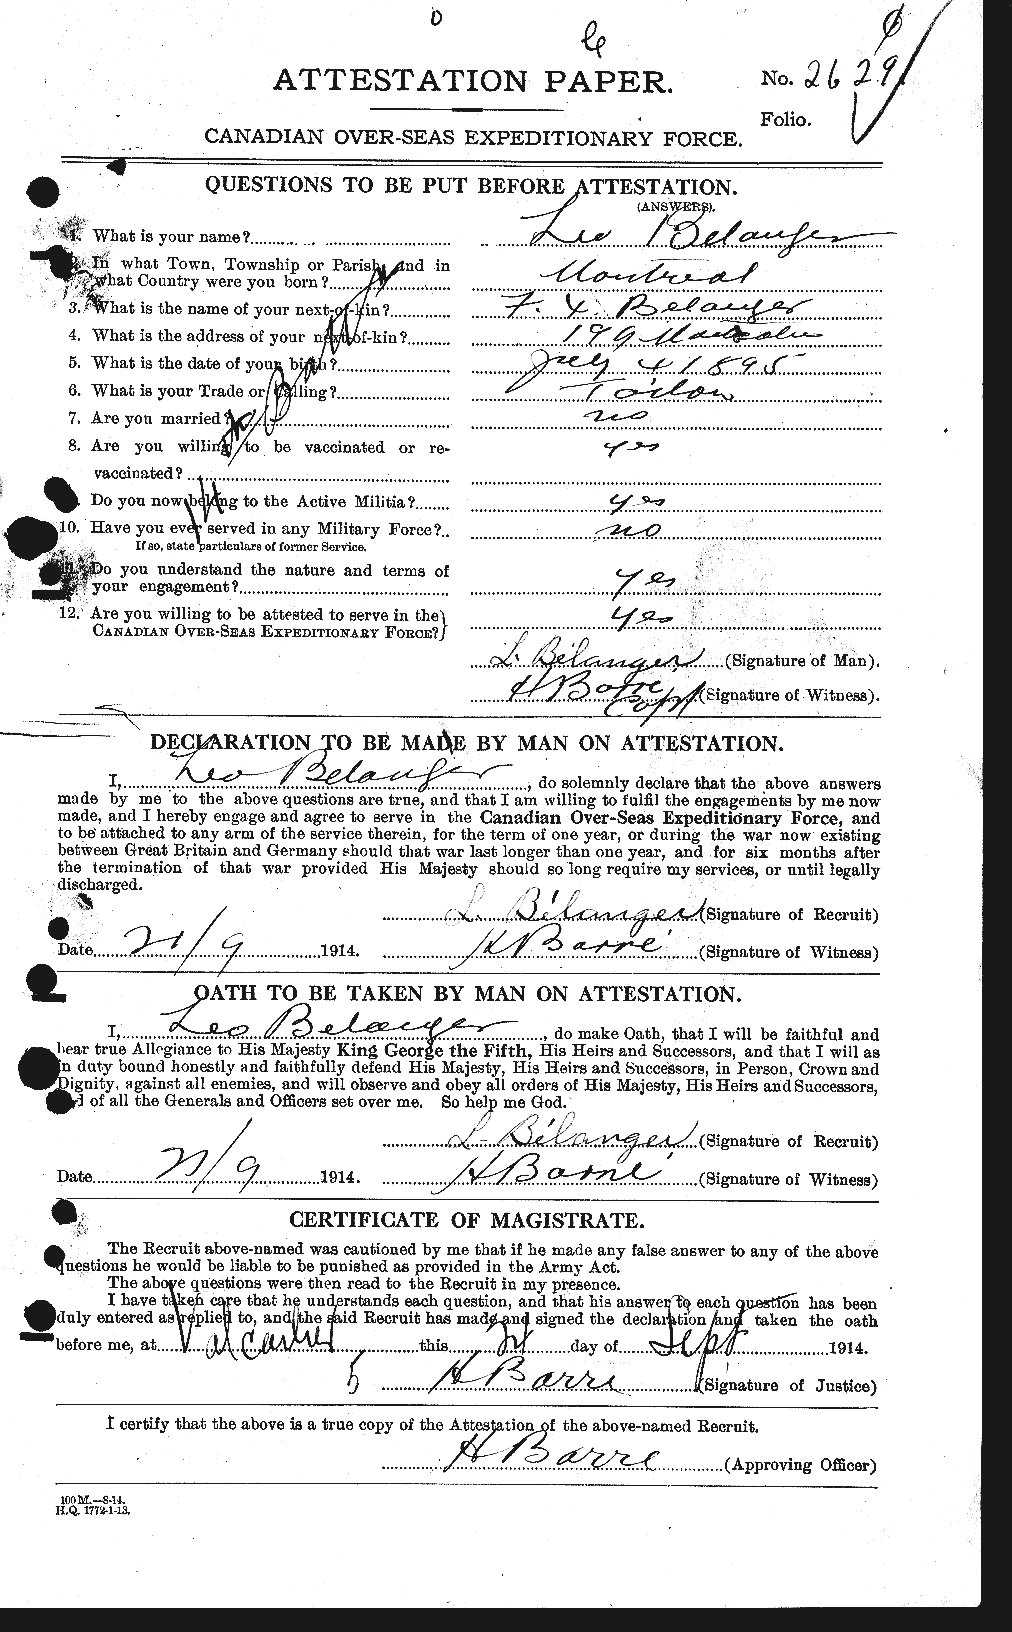 Personnel Records of the First World War - CEF 232701a